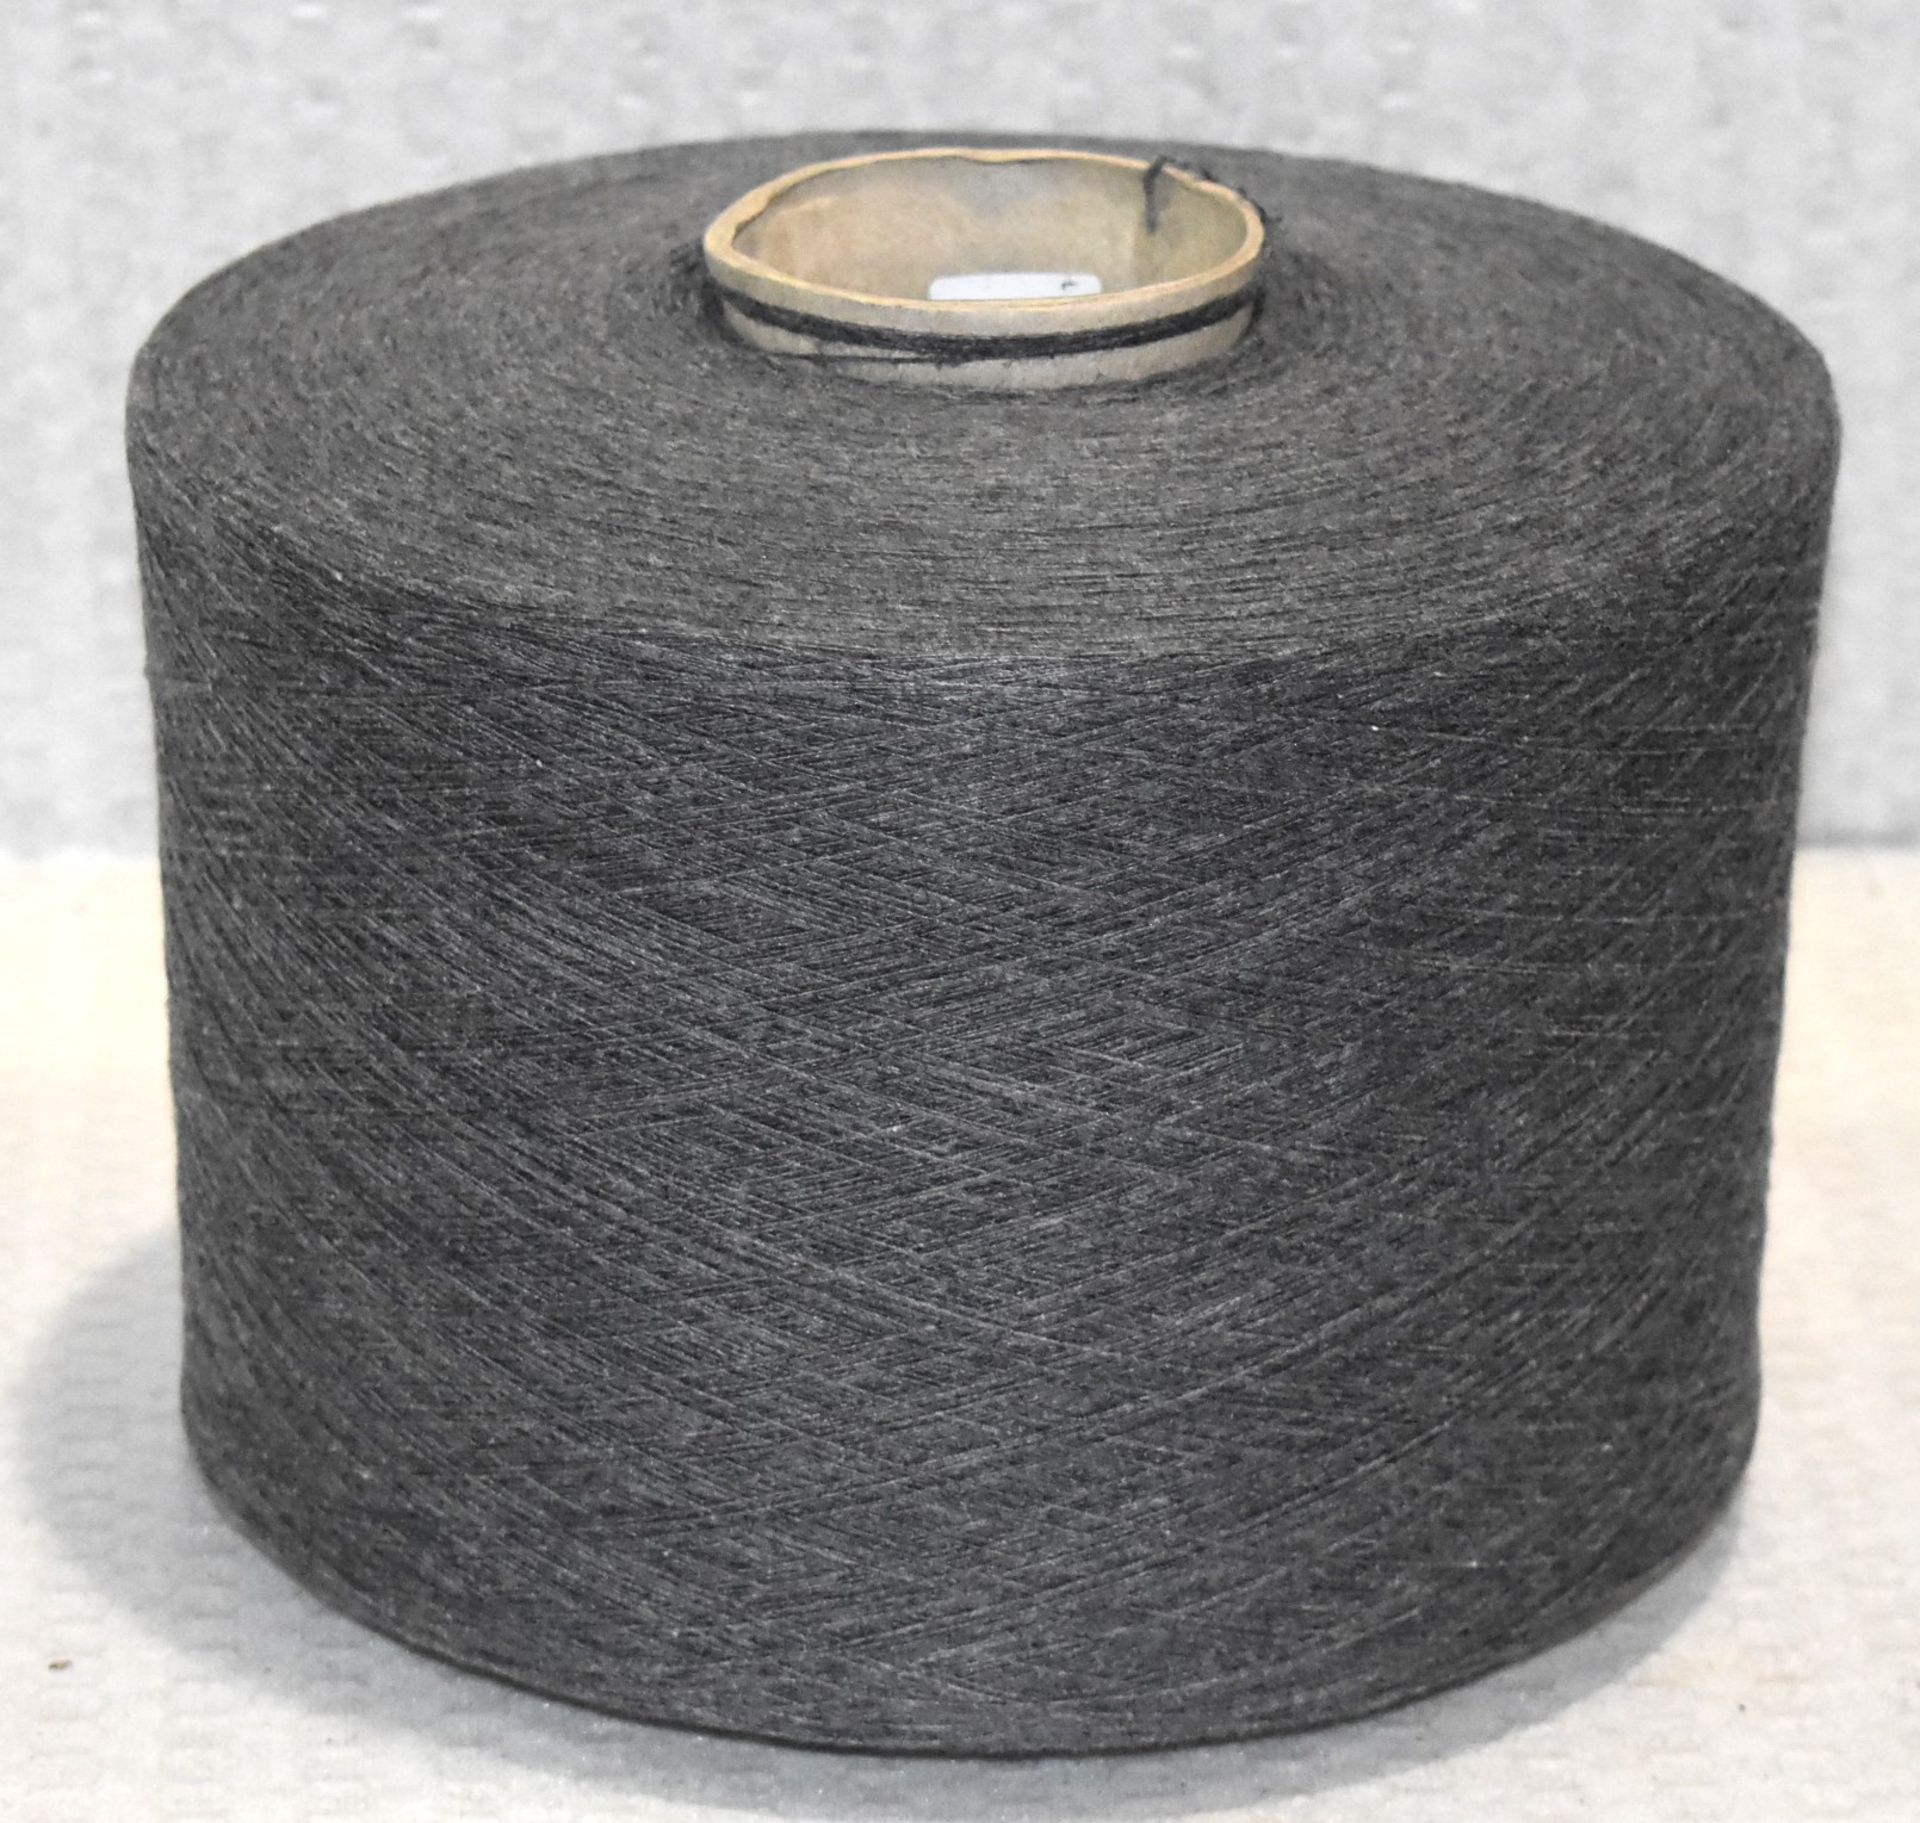 18 x Cones of 1/13 MicroCotton Knitting Yarn - Mid Grey - Approx Weight: 2,500g - New Stock ABL Yarn - Image 7 of 12